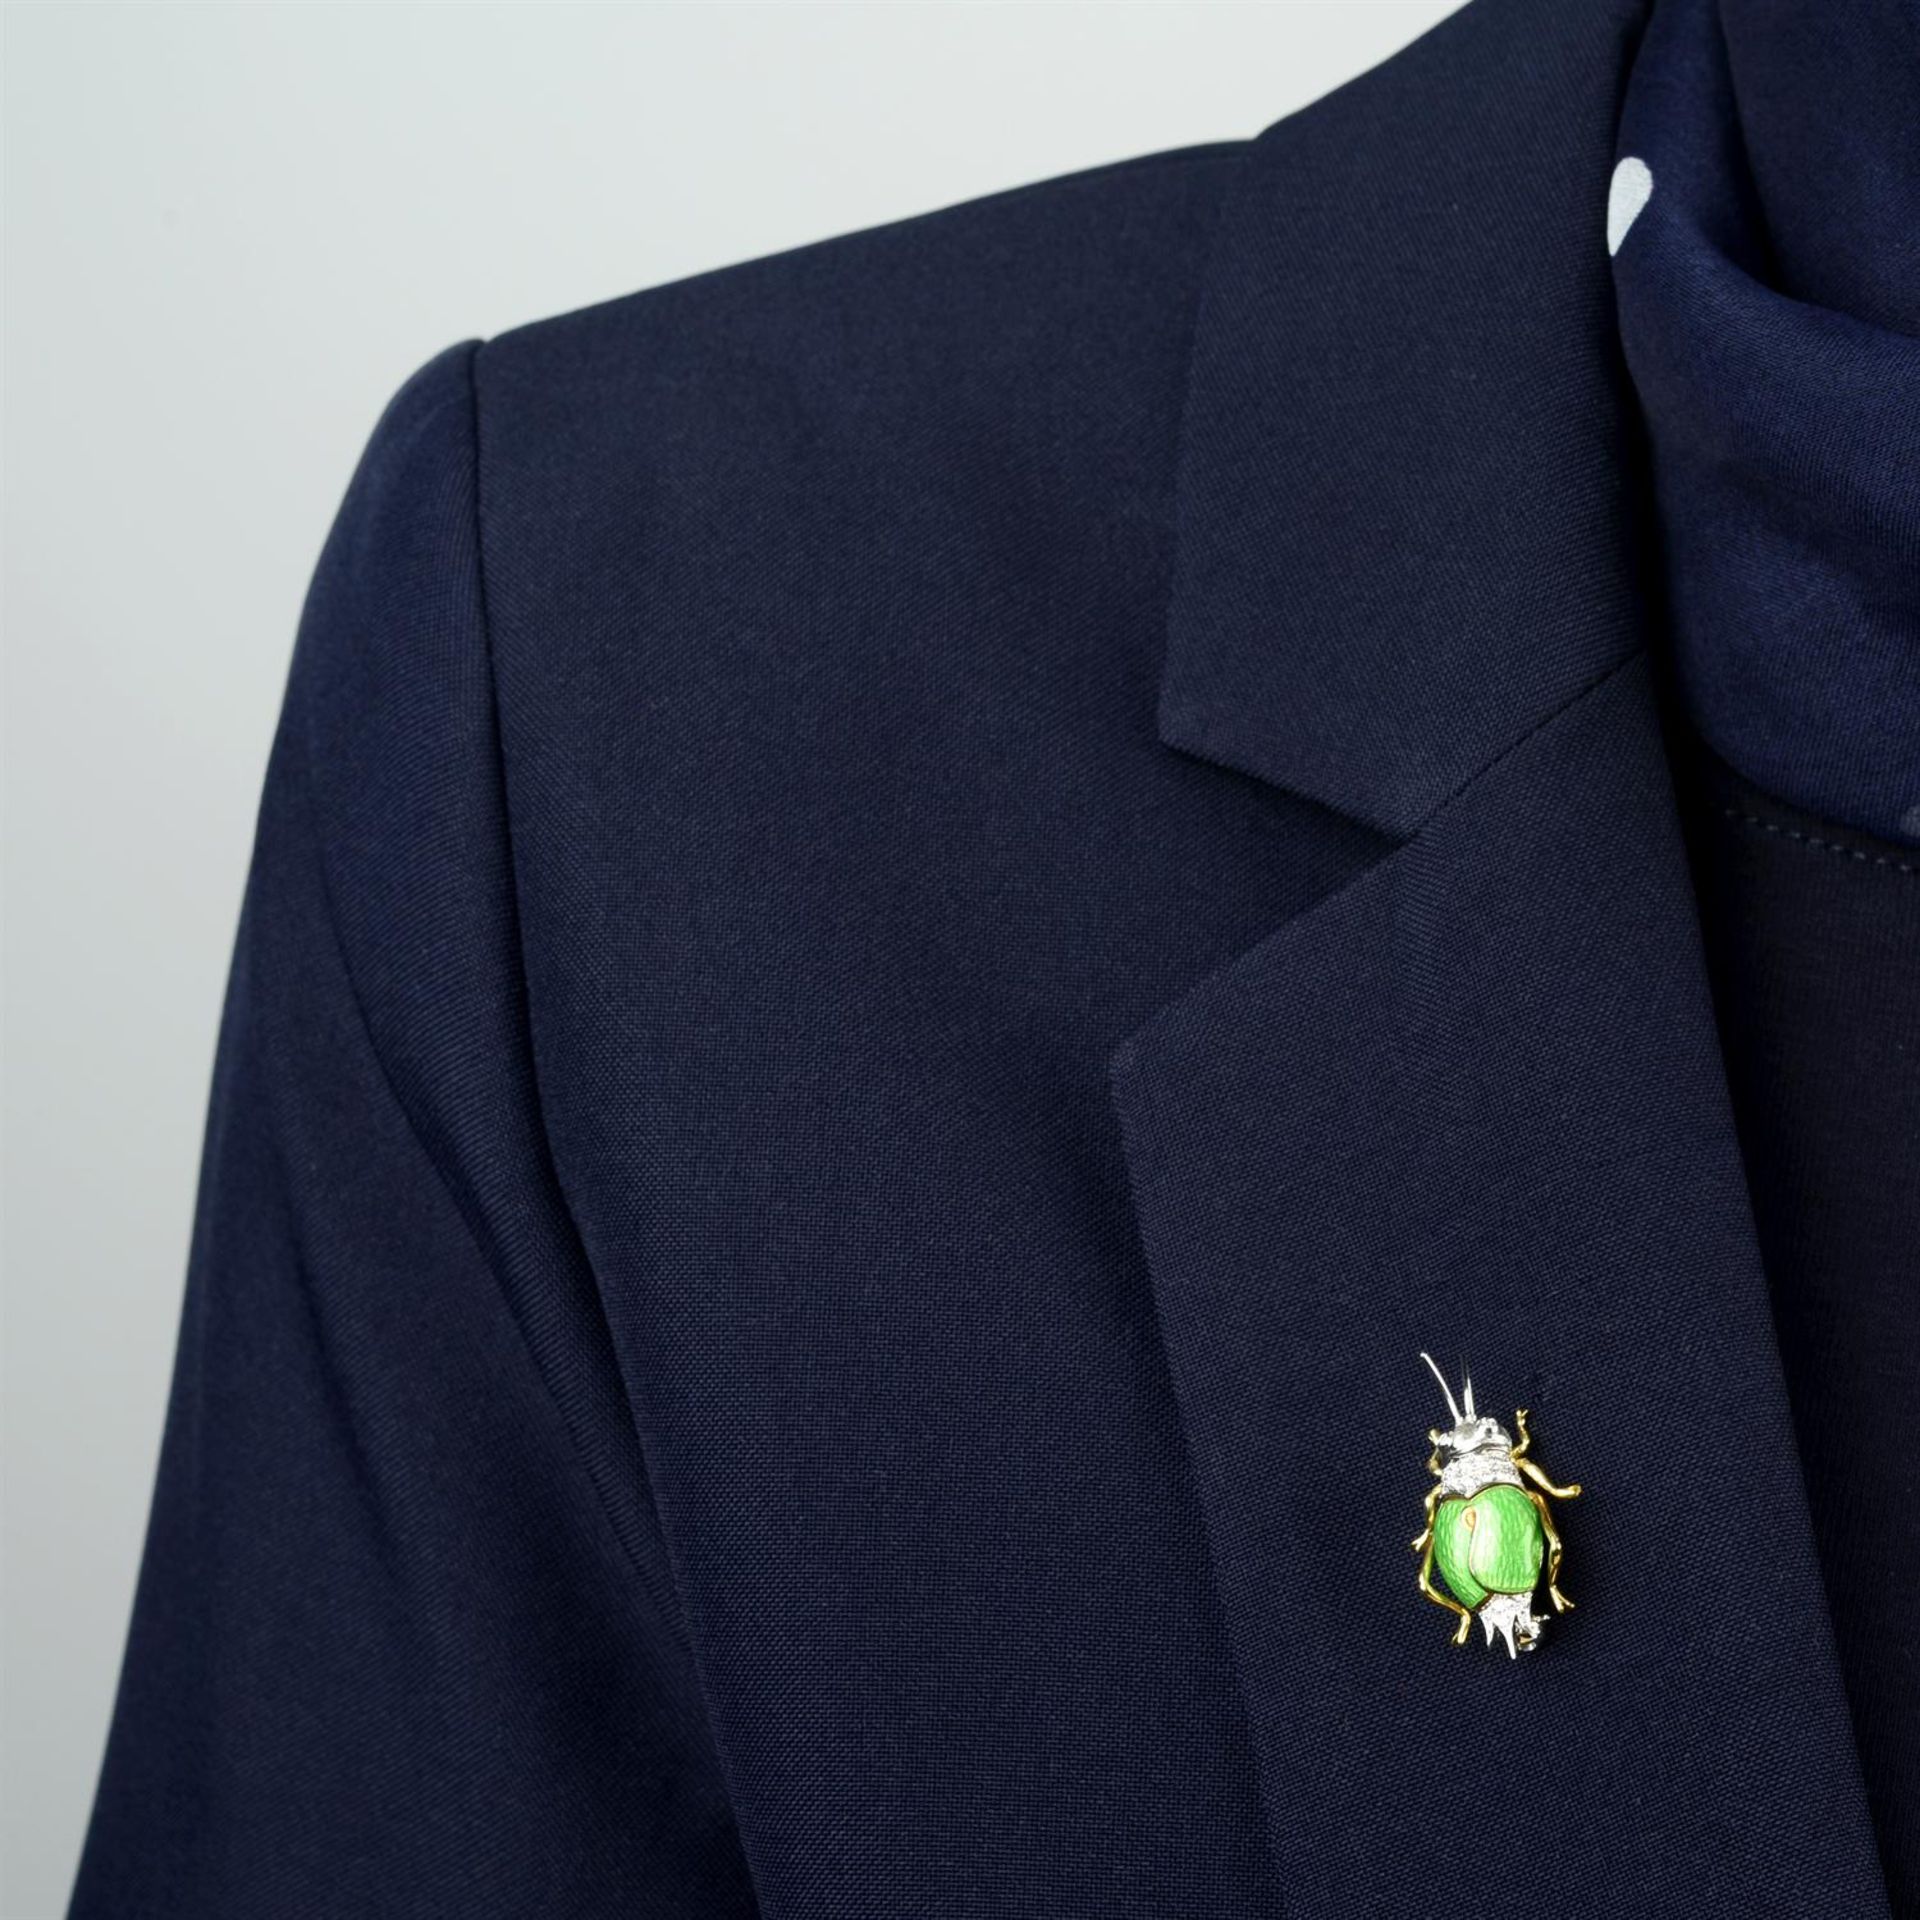 A diamond and green enamel grasshopper brooch, by Gioielli. - Image 4 of 4